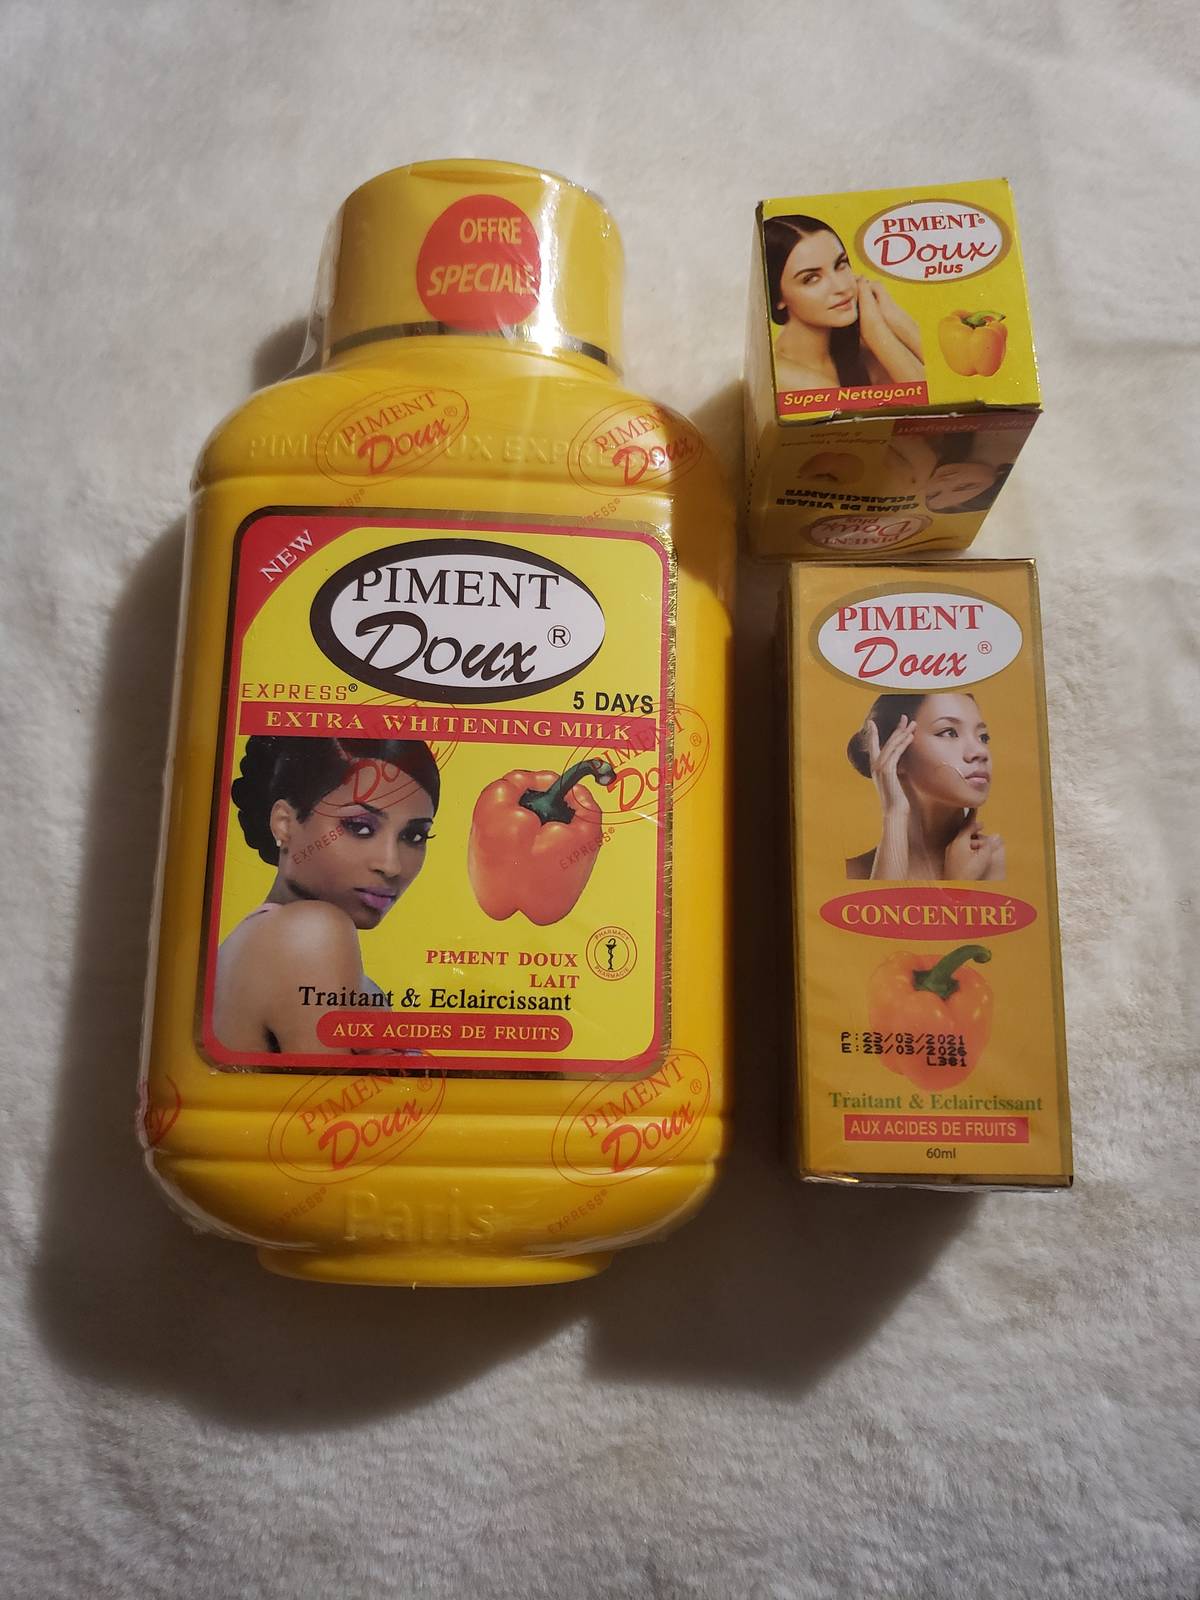 Piment doux express extra whitening milk,serum,face whitening cream with collage